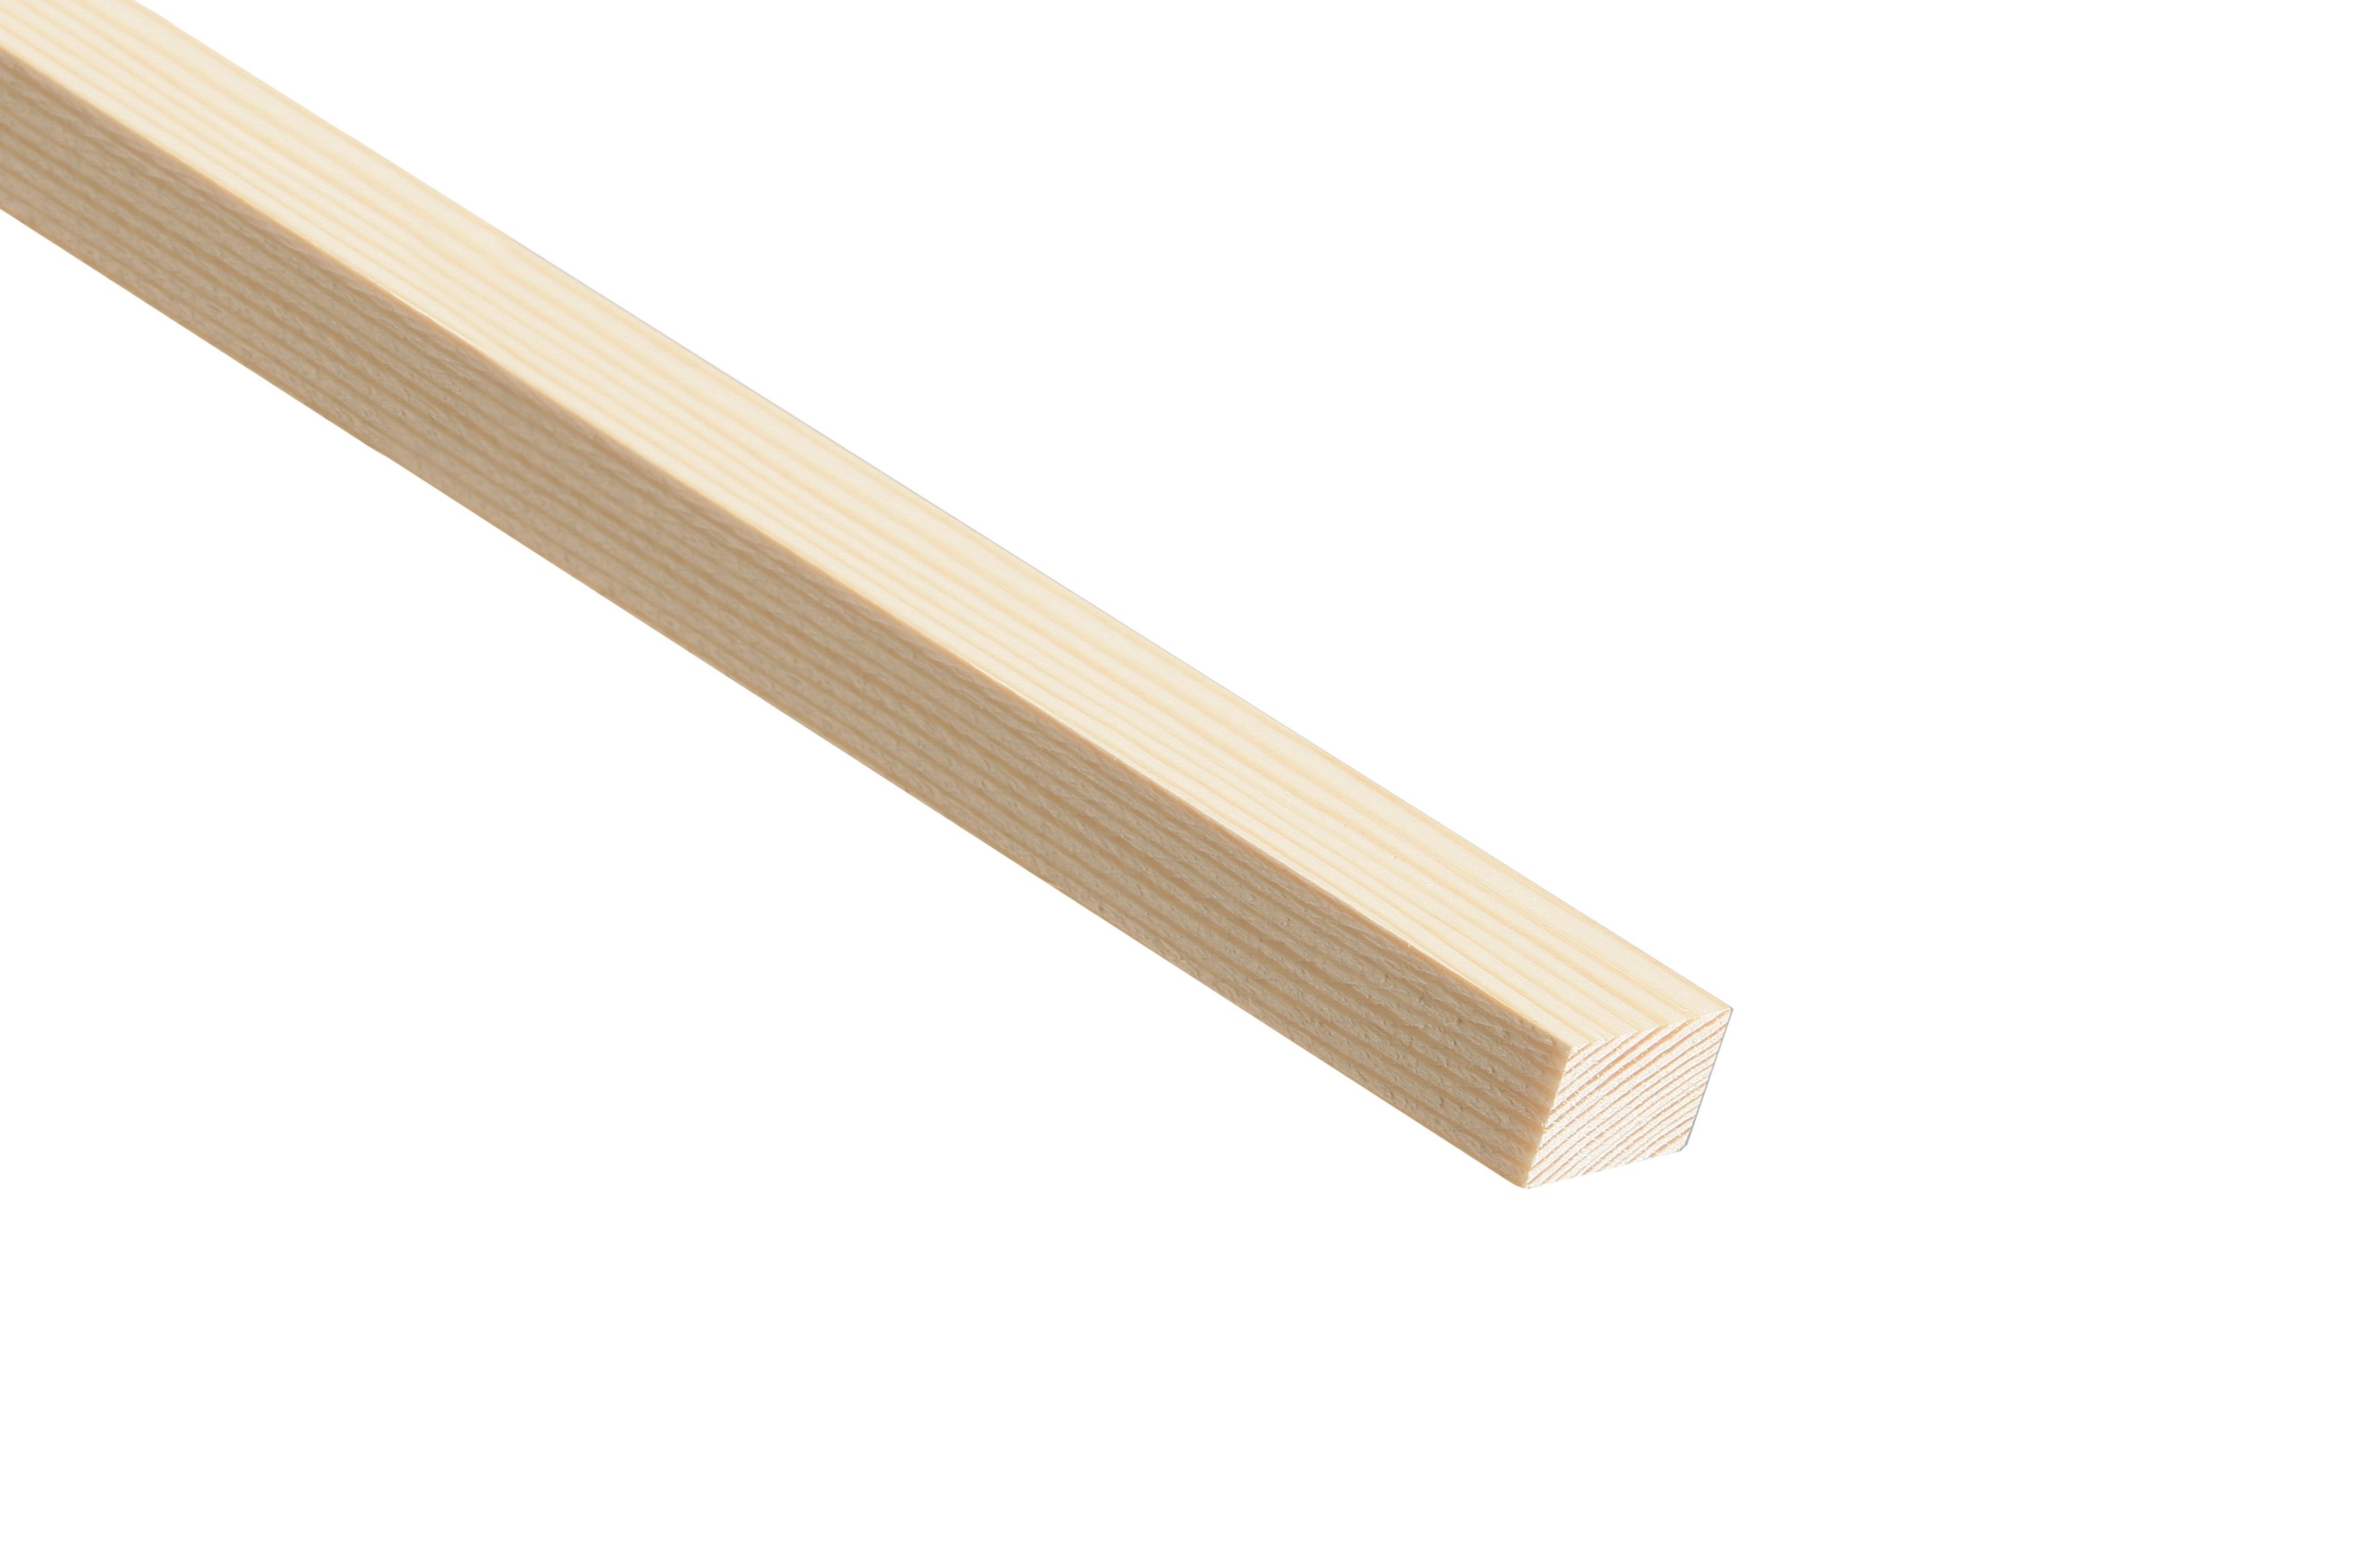 Image of Wickes Pine Stripwood Moulding (PSE) - 12 x 25 x 2400mm